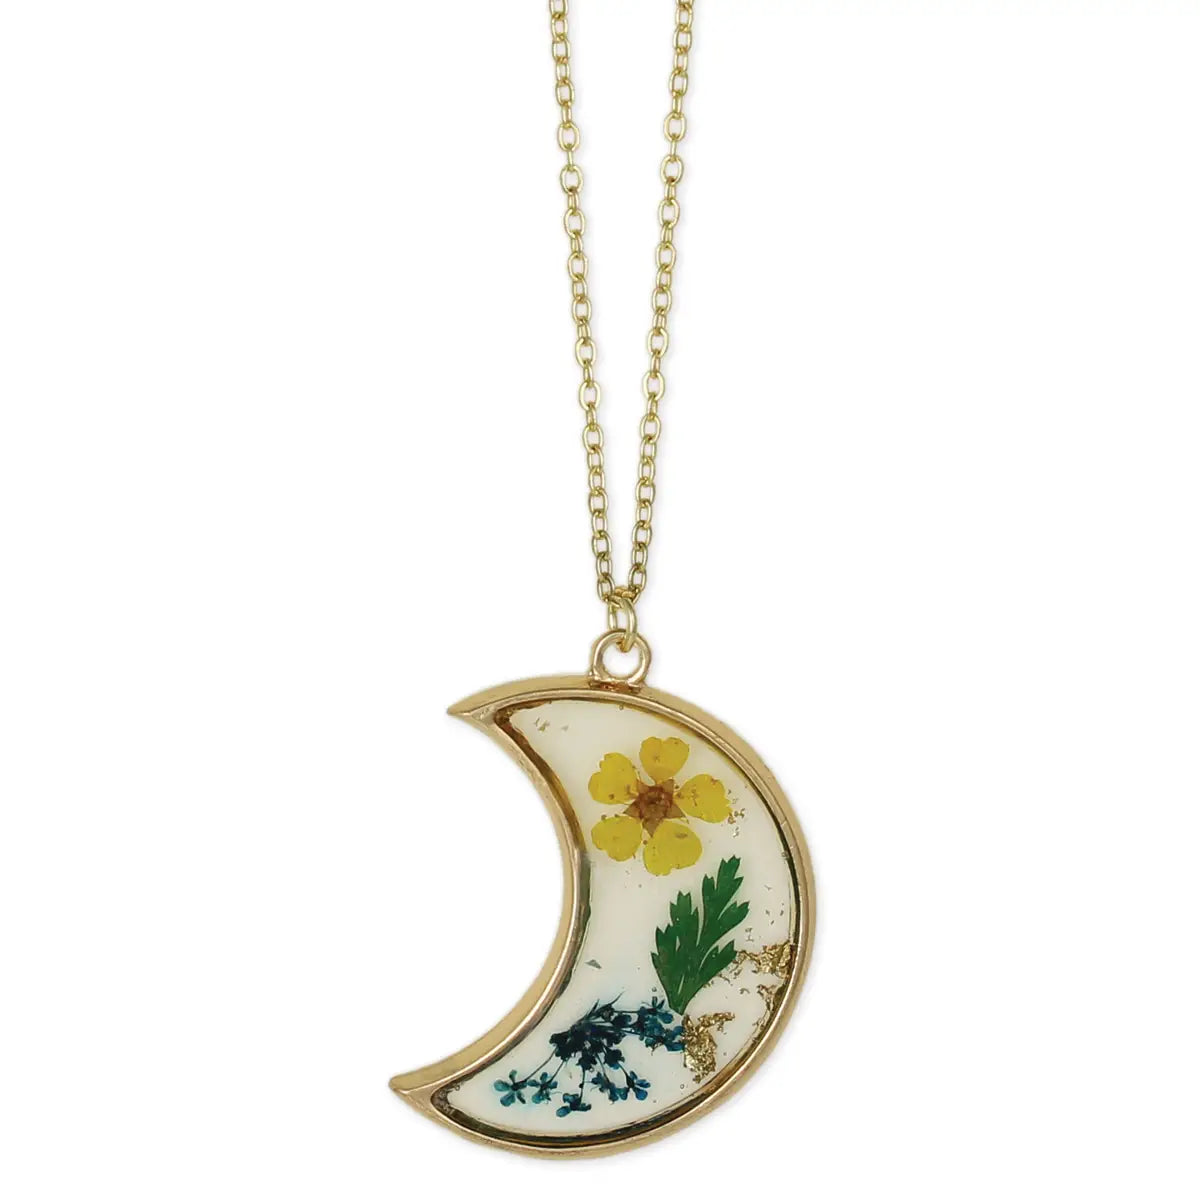 Zad Night Blooms Crescent Died Flower Necklace